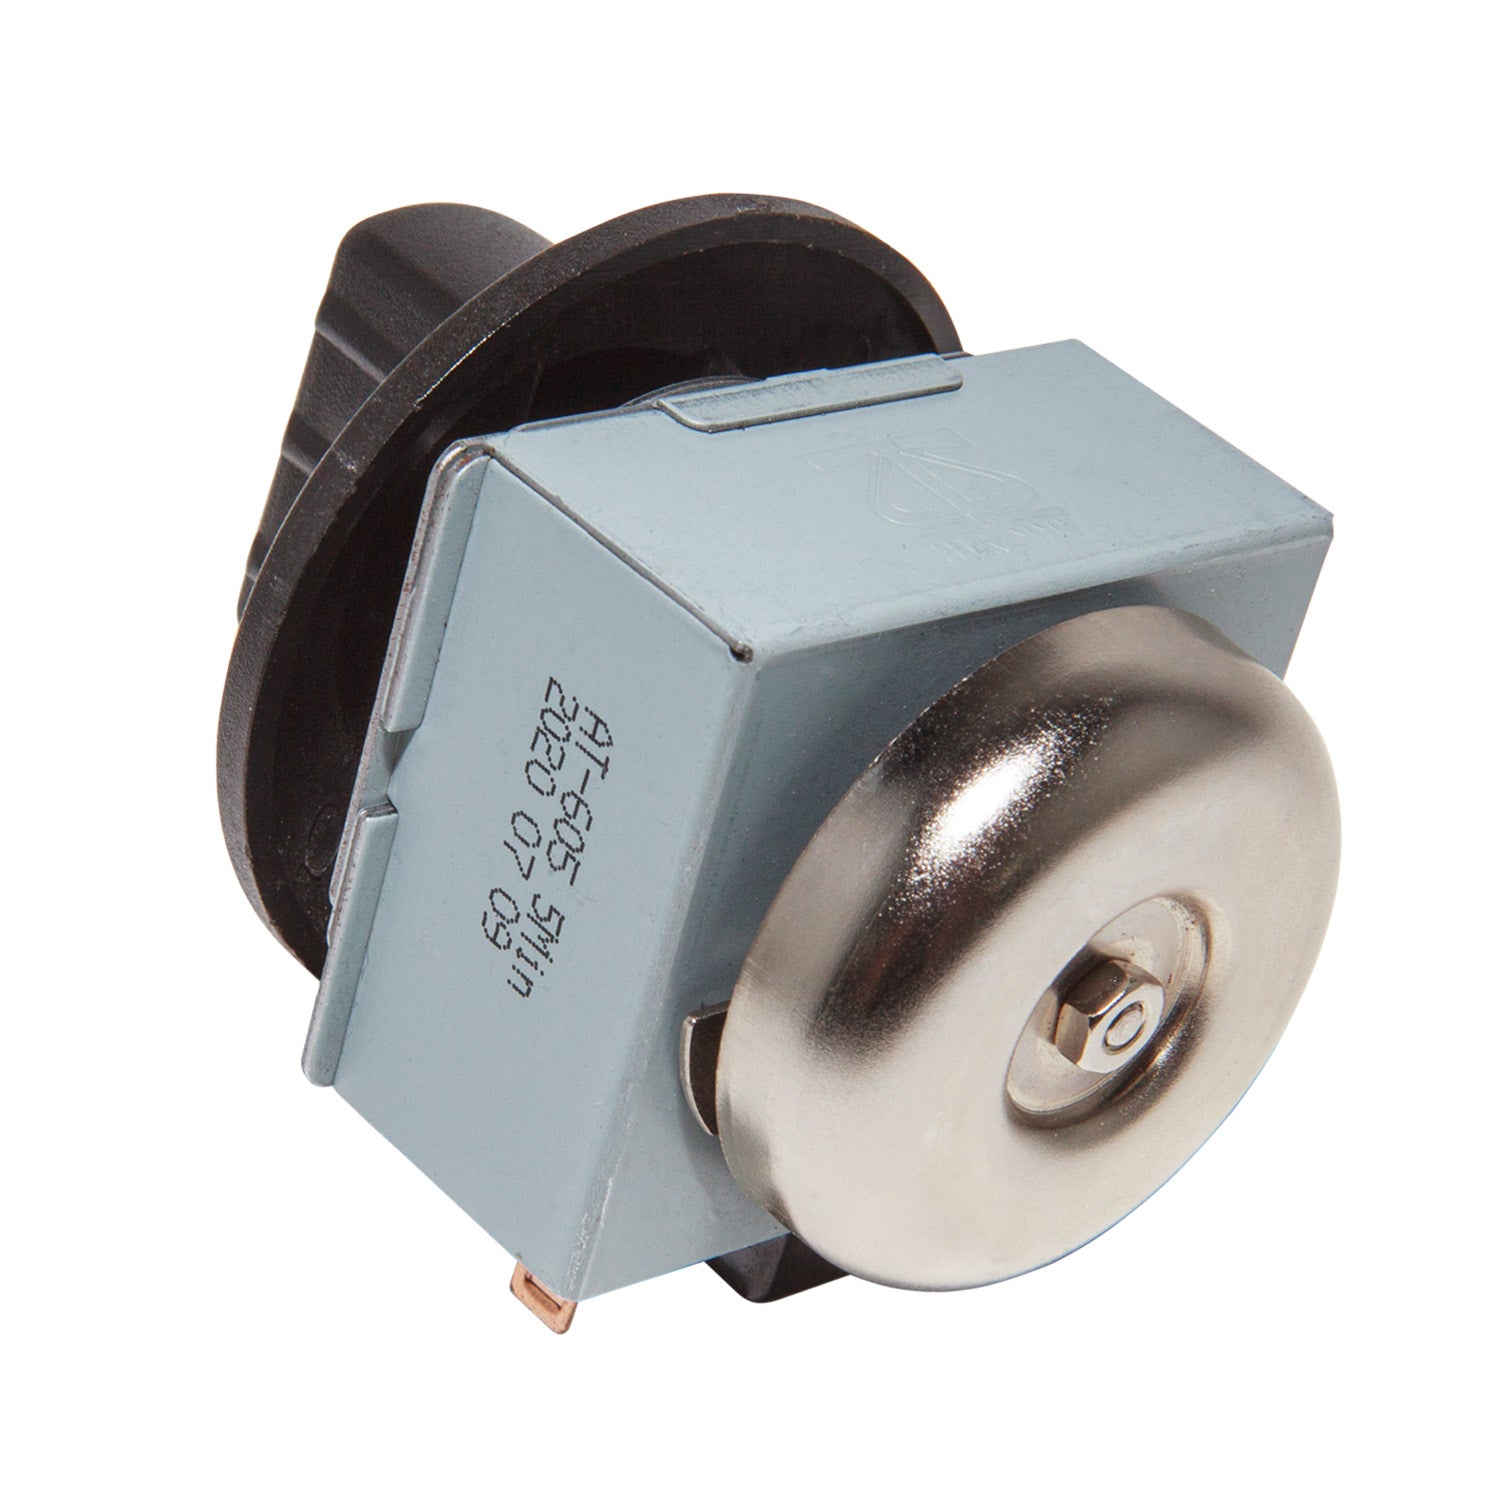 P_TIM Replacement Timer with Knob | Spare Timer with Knob for Waffle Irons